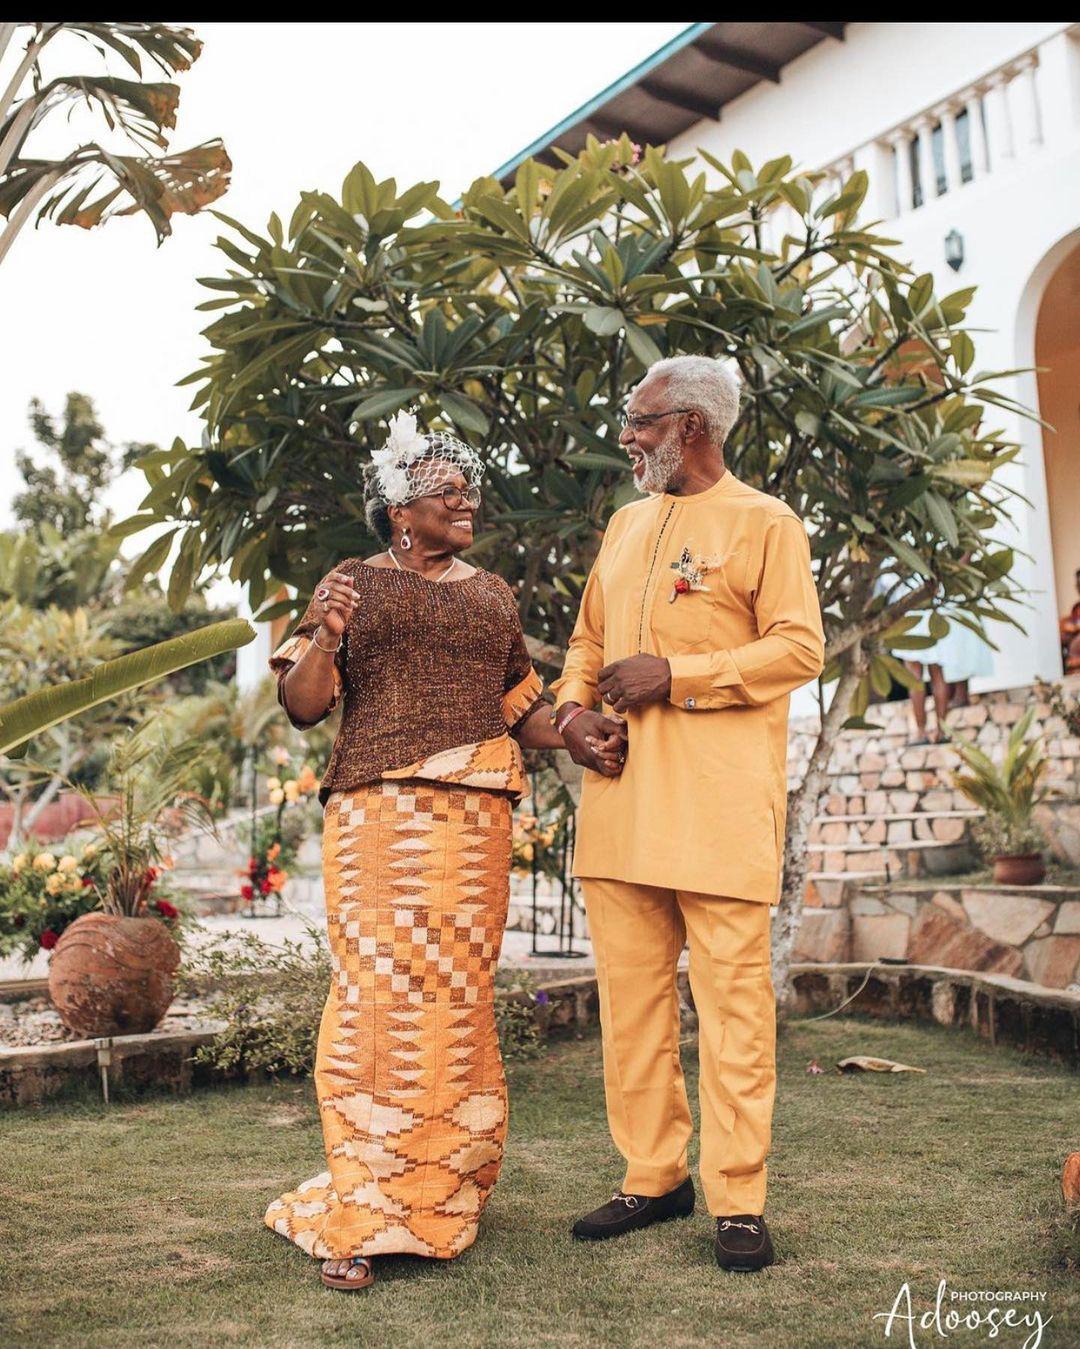 class="content__text"
 Ever wondered what 60yrs of marriage looked like?😍❤️

John &amp; Robenia’s 60th wedding anniversary and vow renewal

Groom outfit: @coverboygh_ 
Wear the brand coverboygh 
___________________________________

_________________________________________________________________
Outfit: @coverboygh_ 
Fabric : @themixtextiles 
_________________________________________________________________
Your looks, Our Pride 👑🎯❣️
For booking and pricing call or Whatsapp +233 20 731 4221 , +233 20 731 4221
_________________________________________________________________

Grooms outfit: @coverboygh_ 
Photographer: @shotbyadoosey 
Planning &amp; Coordination: @purpletwirlevents 
Event design &amp; decor: @philipmerevents 
Videography: @prosvid .
Catering: @sunlodgehotel 
Venue: @villateranga 
MC: @georgebannerman 
DJ: @di_selorm 
Brides outfit: @cyndoscollection 
Guests' outfits: @sedinamhop 
Fascinator: @hatboxco 
Drinks: @abbeeschillbox 
Cocktails: @wheelbarogh 
Live Streaming: @aseyehtv 

_ _________________________________________________________________

Follow our pages 
Styling page : @coverboykobby 
Clothing brand : @coverboygh_ 
Footwear’s brand : @coverboyshoes_ 
Modeling agency: @malex_modelling_agency_ 
Drip together with the Dripgod 💧 @_dripgod_ck_ 

___________________________________
 #wedding #prewedding #brideandgroom #love #ukwedding #nigerianweddings #nigerianwedding #ukweddingphotographer #ghanawedding #bellanaijaweddings #idoghana #bride #wedding #weddingphotography #london #africanwedding #shotbyadoosey
 #purpletwirlevent #60thanniversary #vowrenewalceremony #vowrenewal #receptionparty #africanamerican #couple #ghanaparty #weddingplanningghana #ghanabride #purpletwirlevents #purpletwirlwedding #ghanawedding #ghanaweddingvendors #ghanaweddingplanner 
 